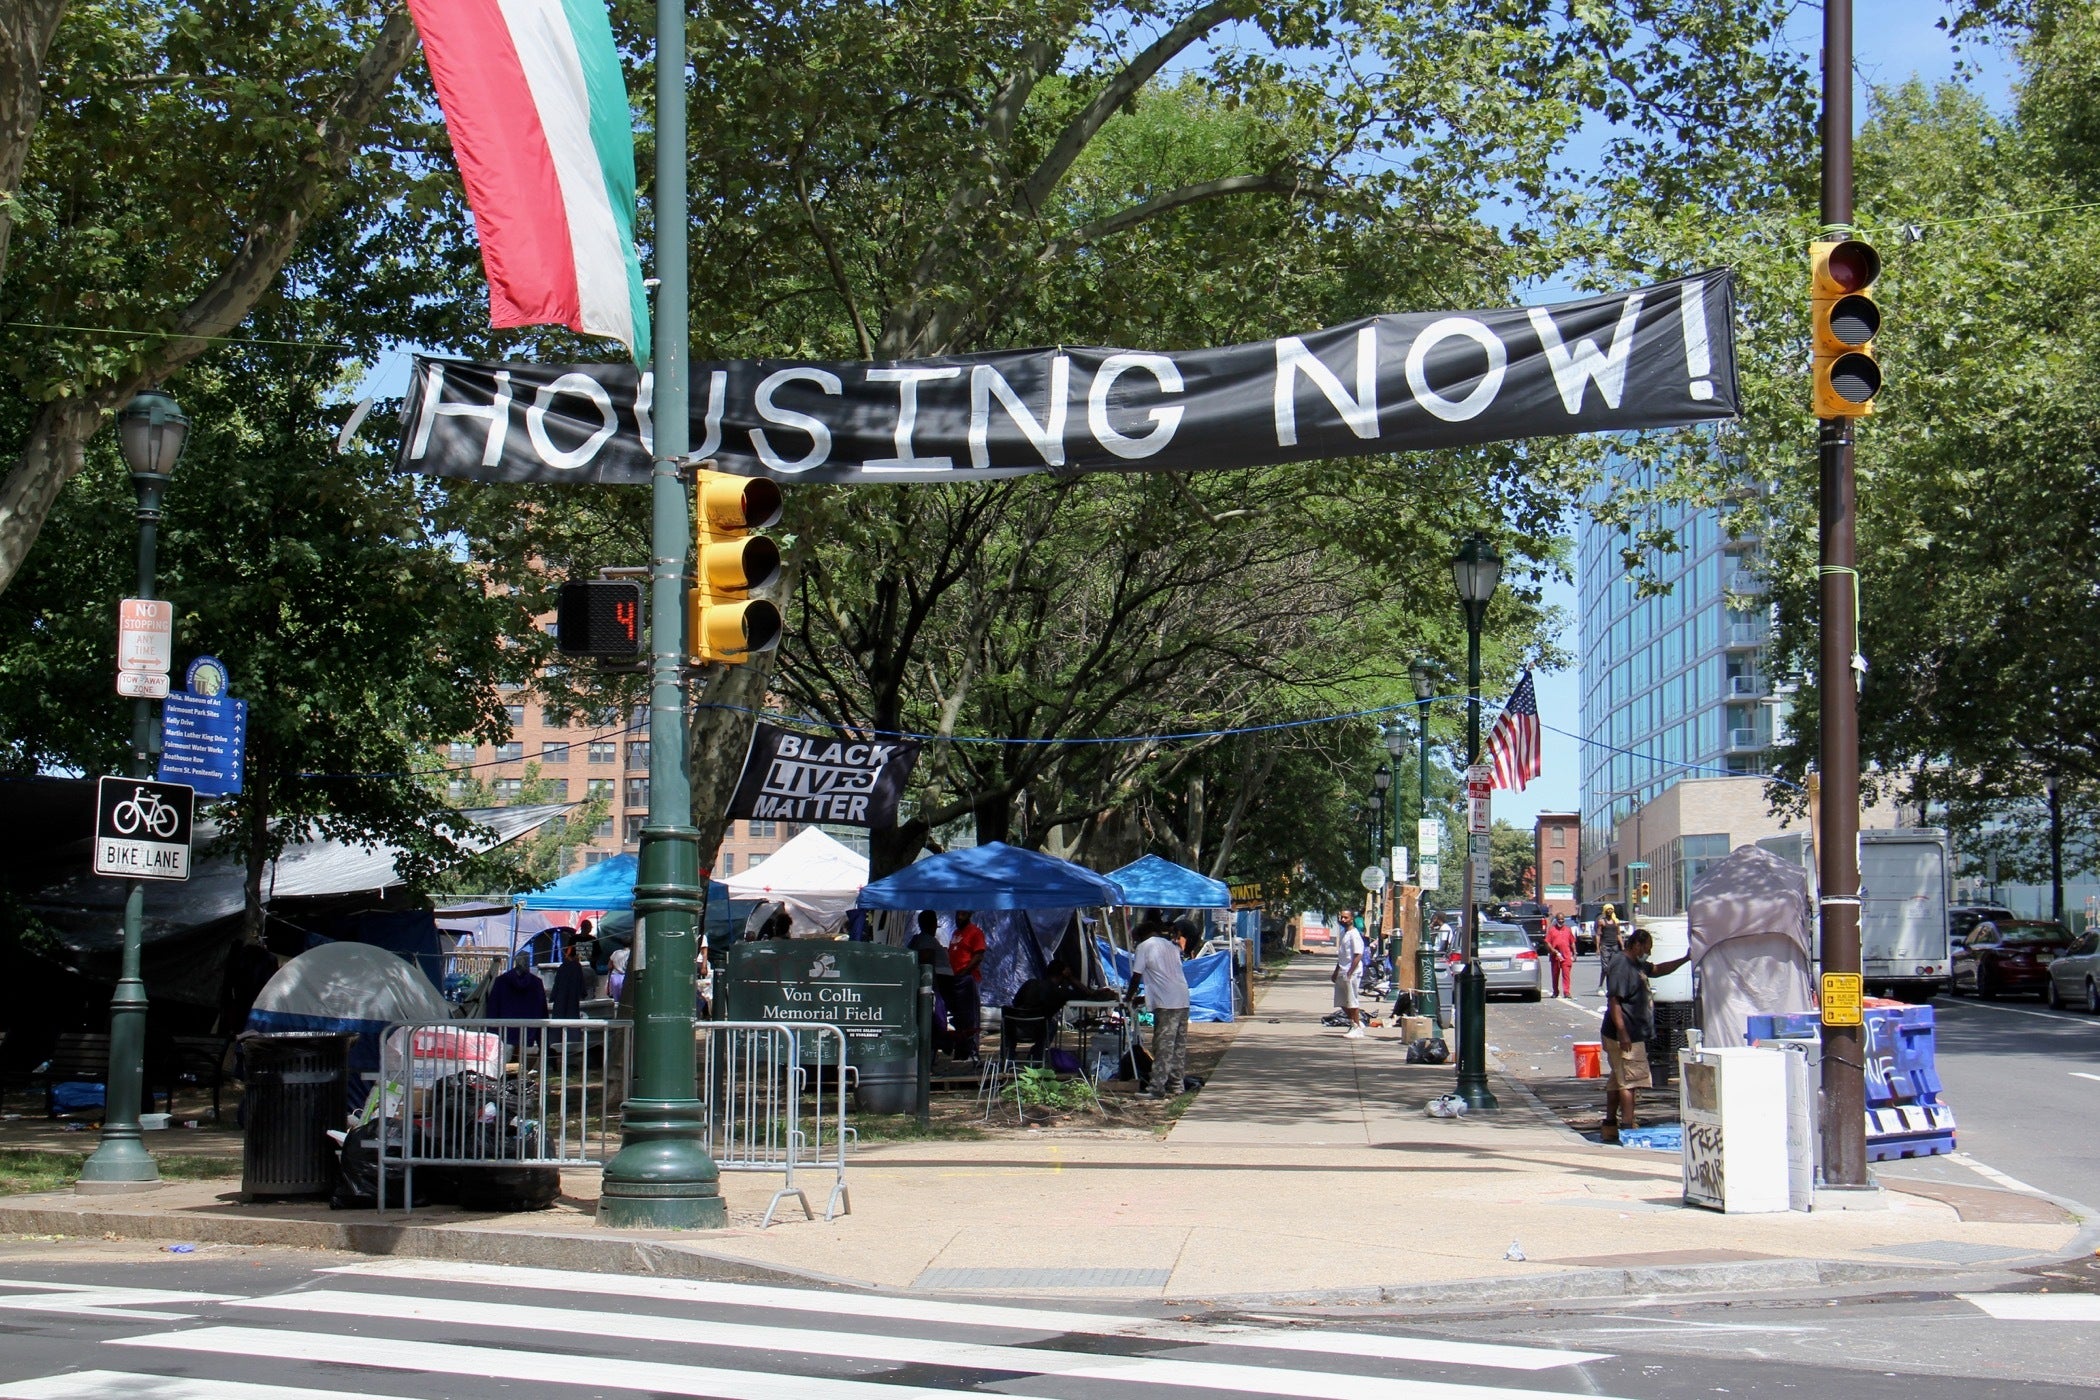 A homeless protest encampment occupies Von Colln Field on the Ben Franklin Parkway